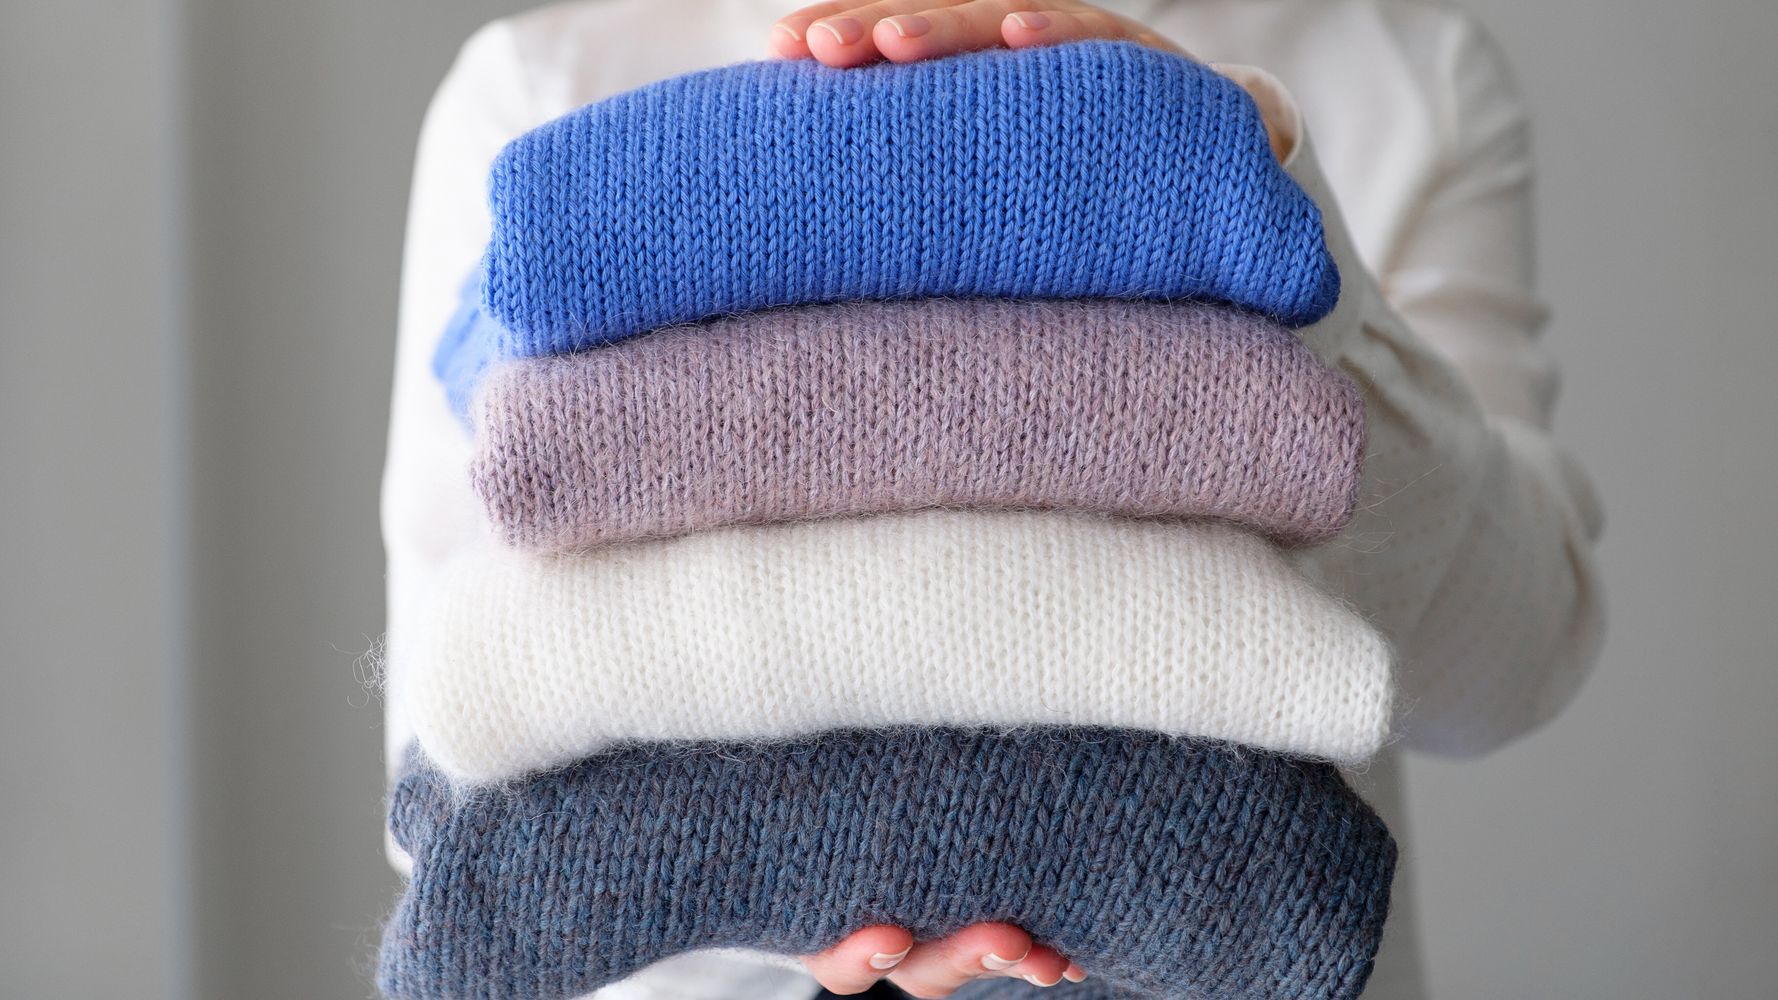 Lint removers: The best tool for keeping your woolens lint-free